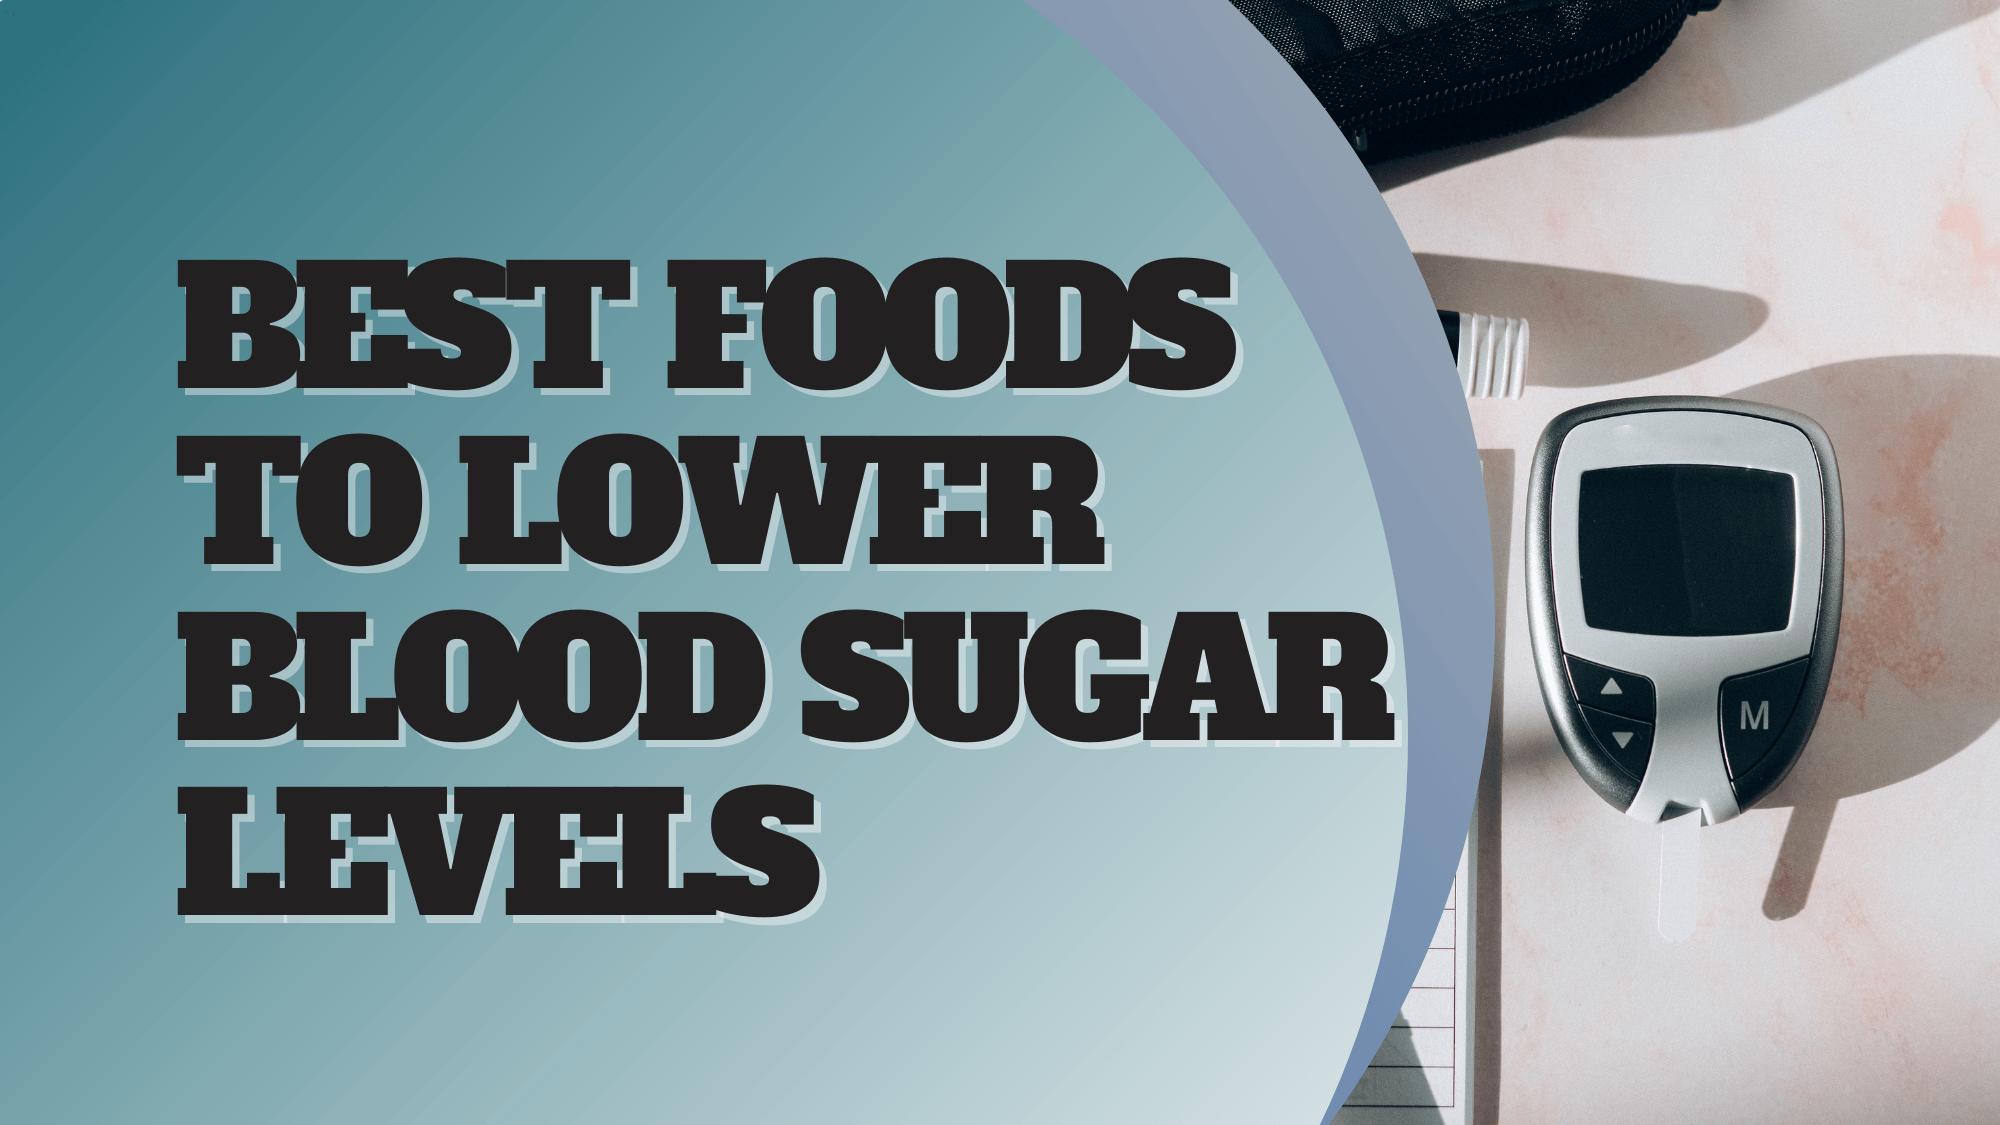 Best Foods to Lower Blood Sugar levels